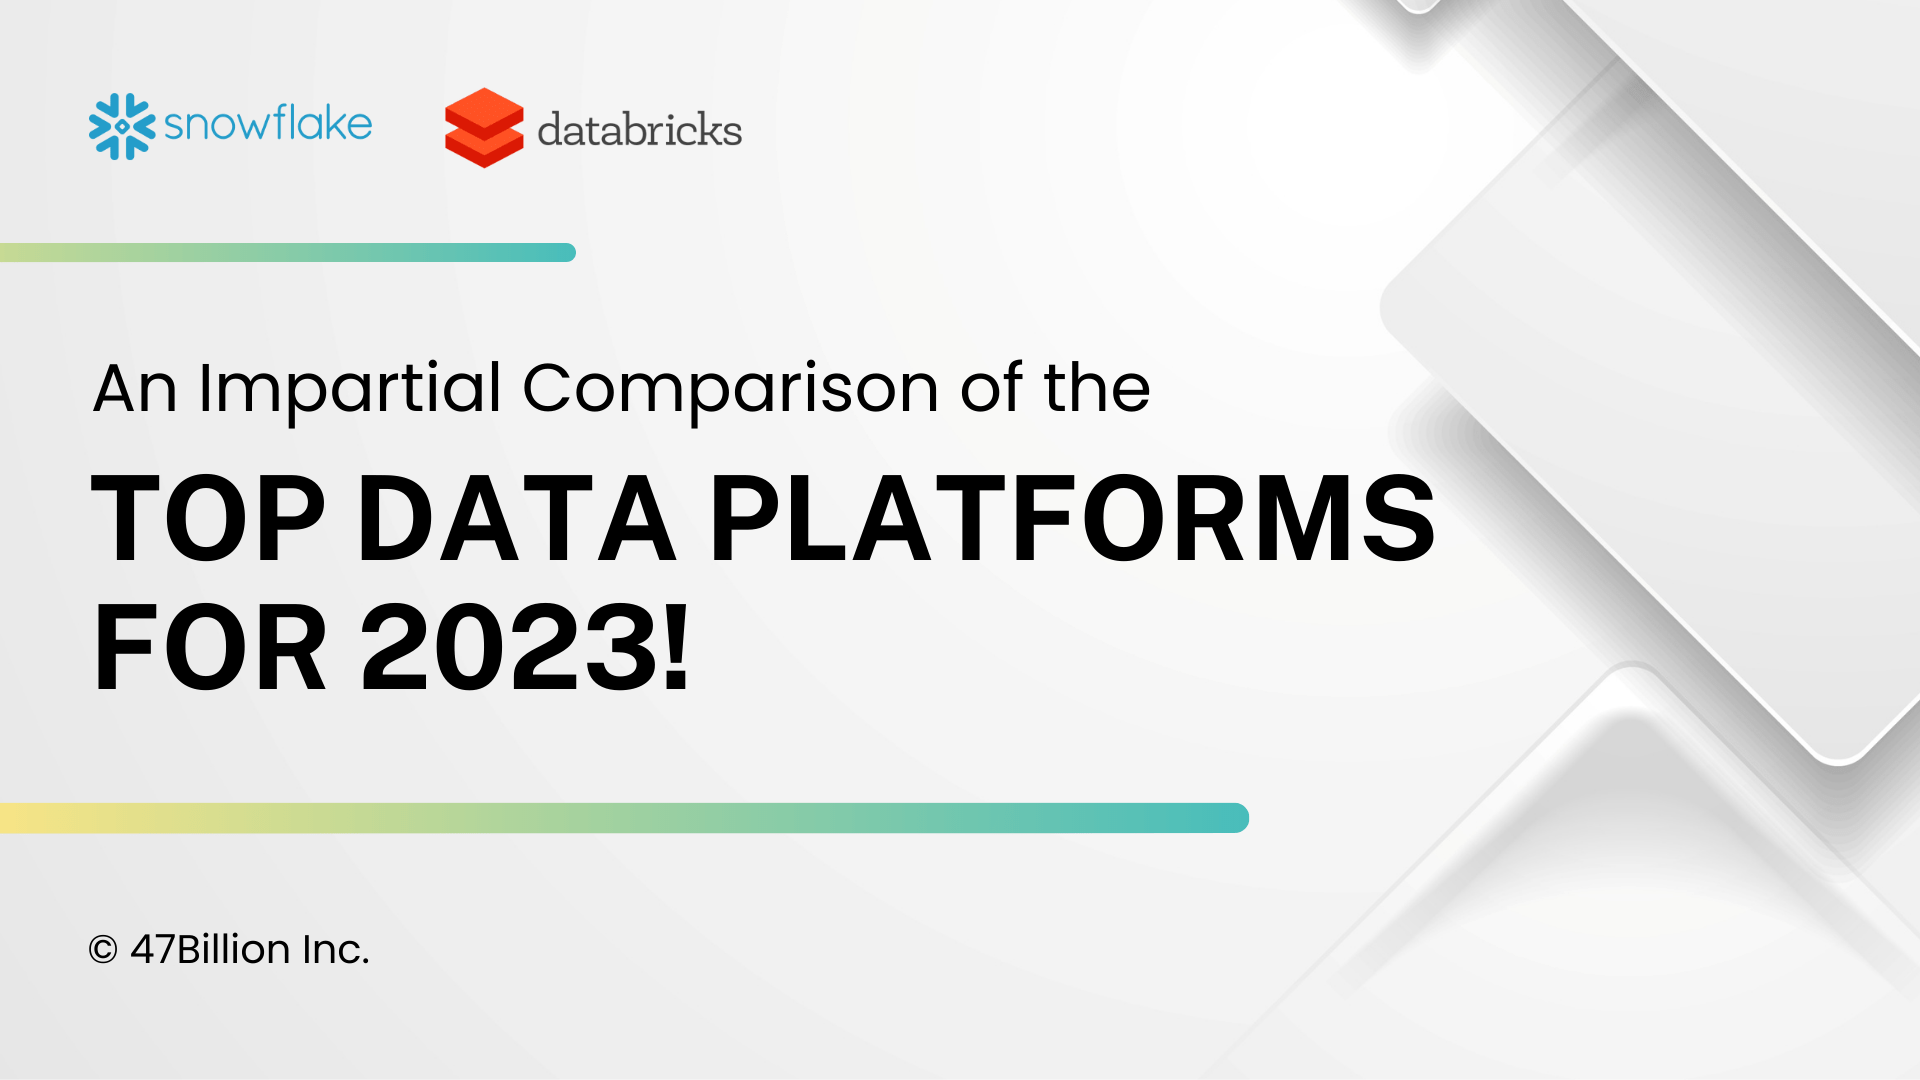 Databricks or Snowflake: An Impartial Comparison of the Top Data Platforms for 2023 